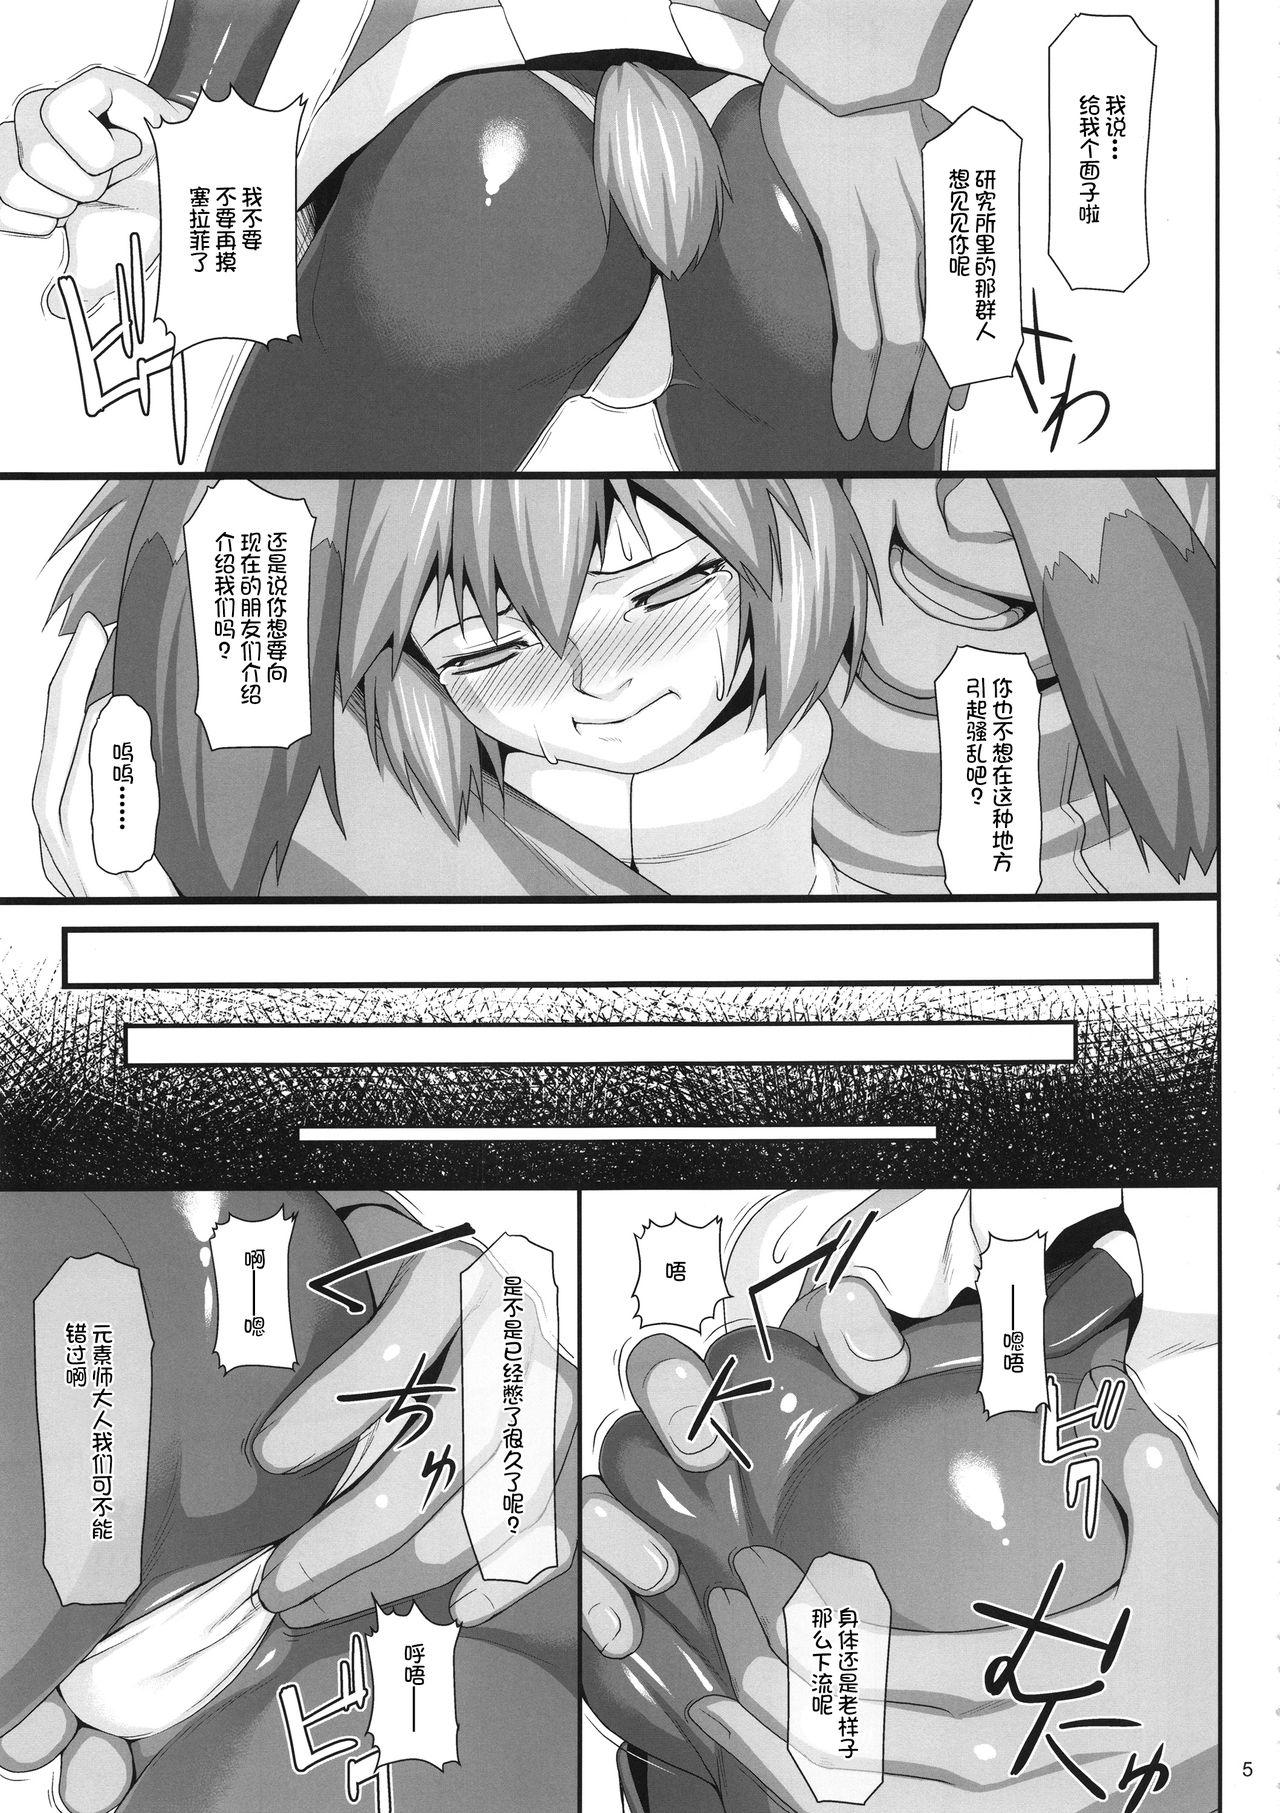 Gay Kissing Seraphic Gate 4 - Xenogears Perfect Porn - Page 5